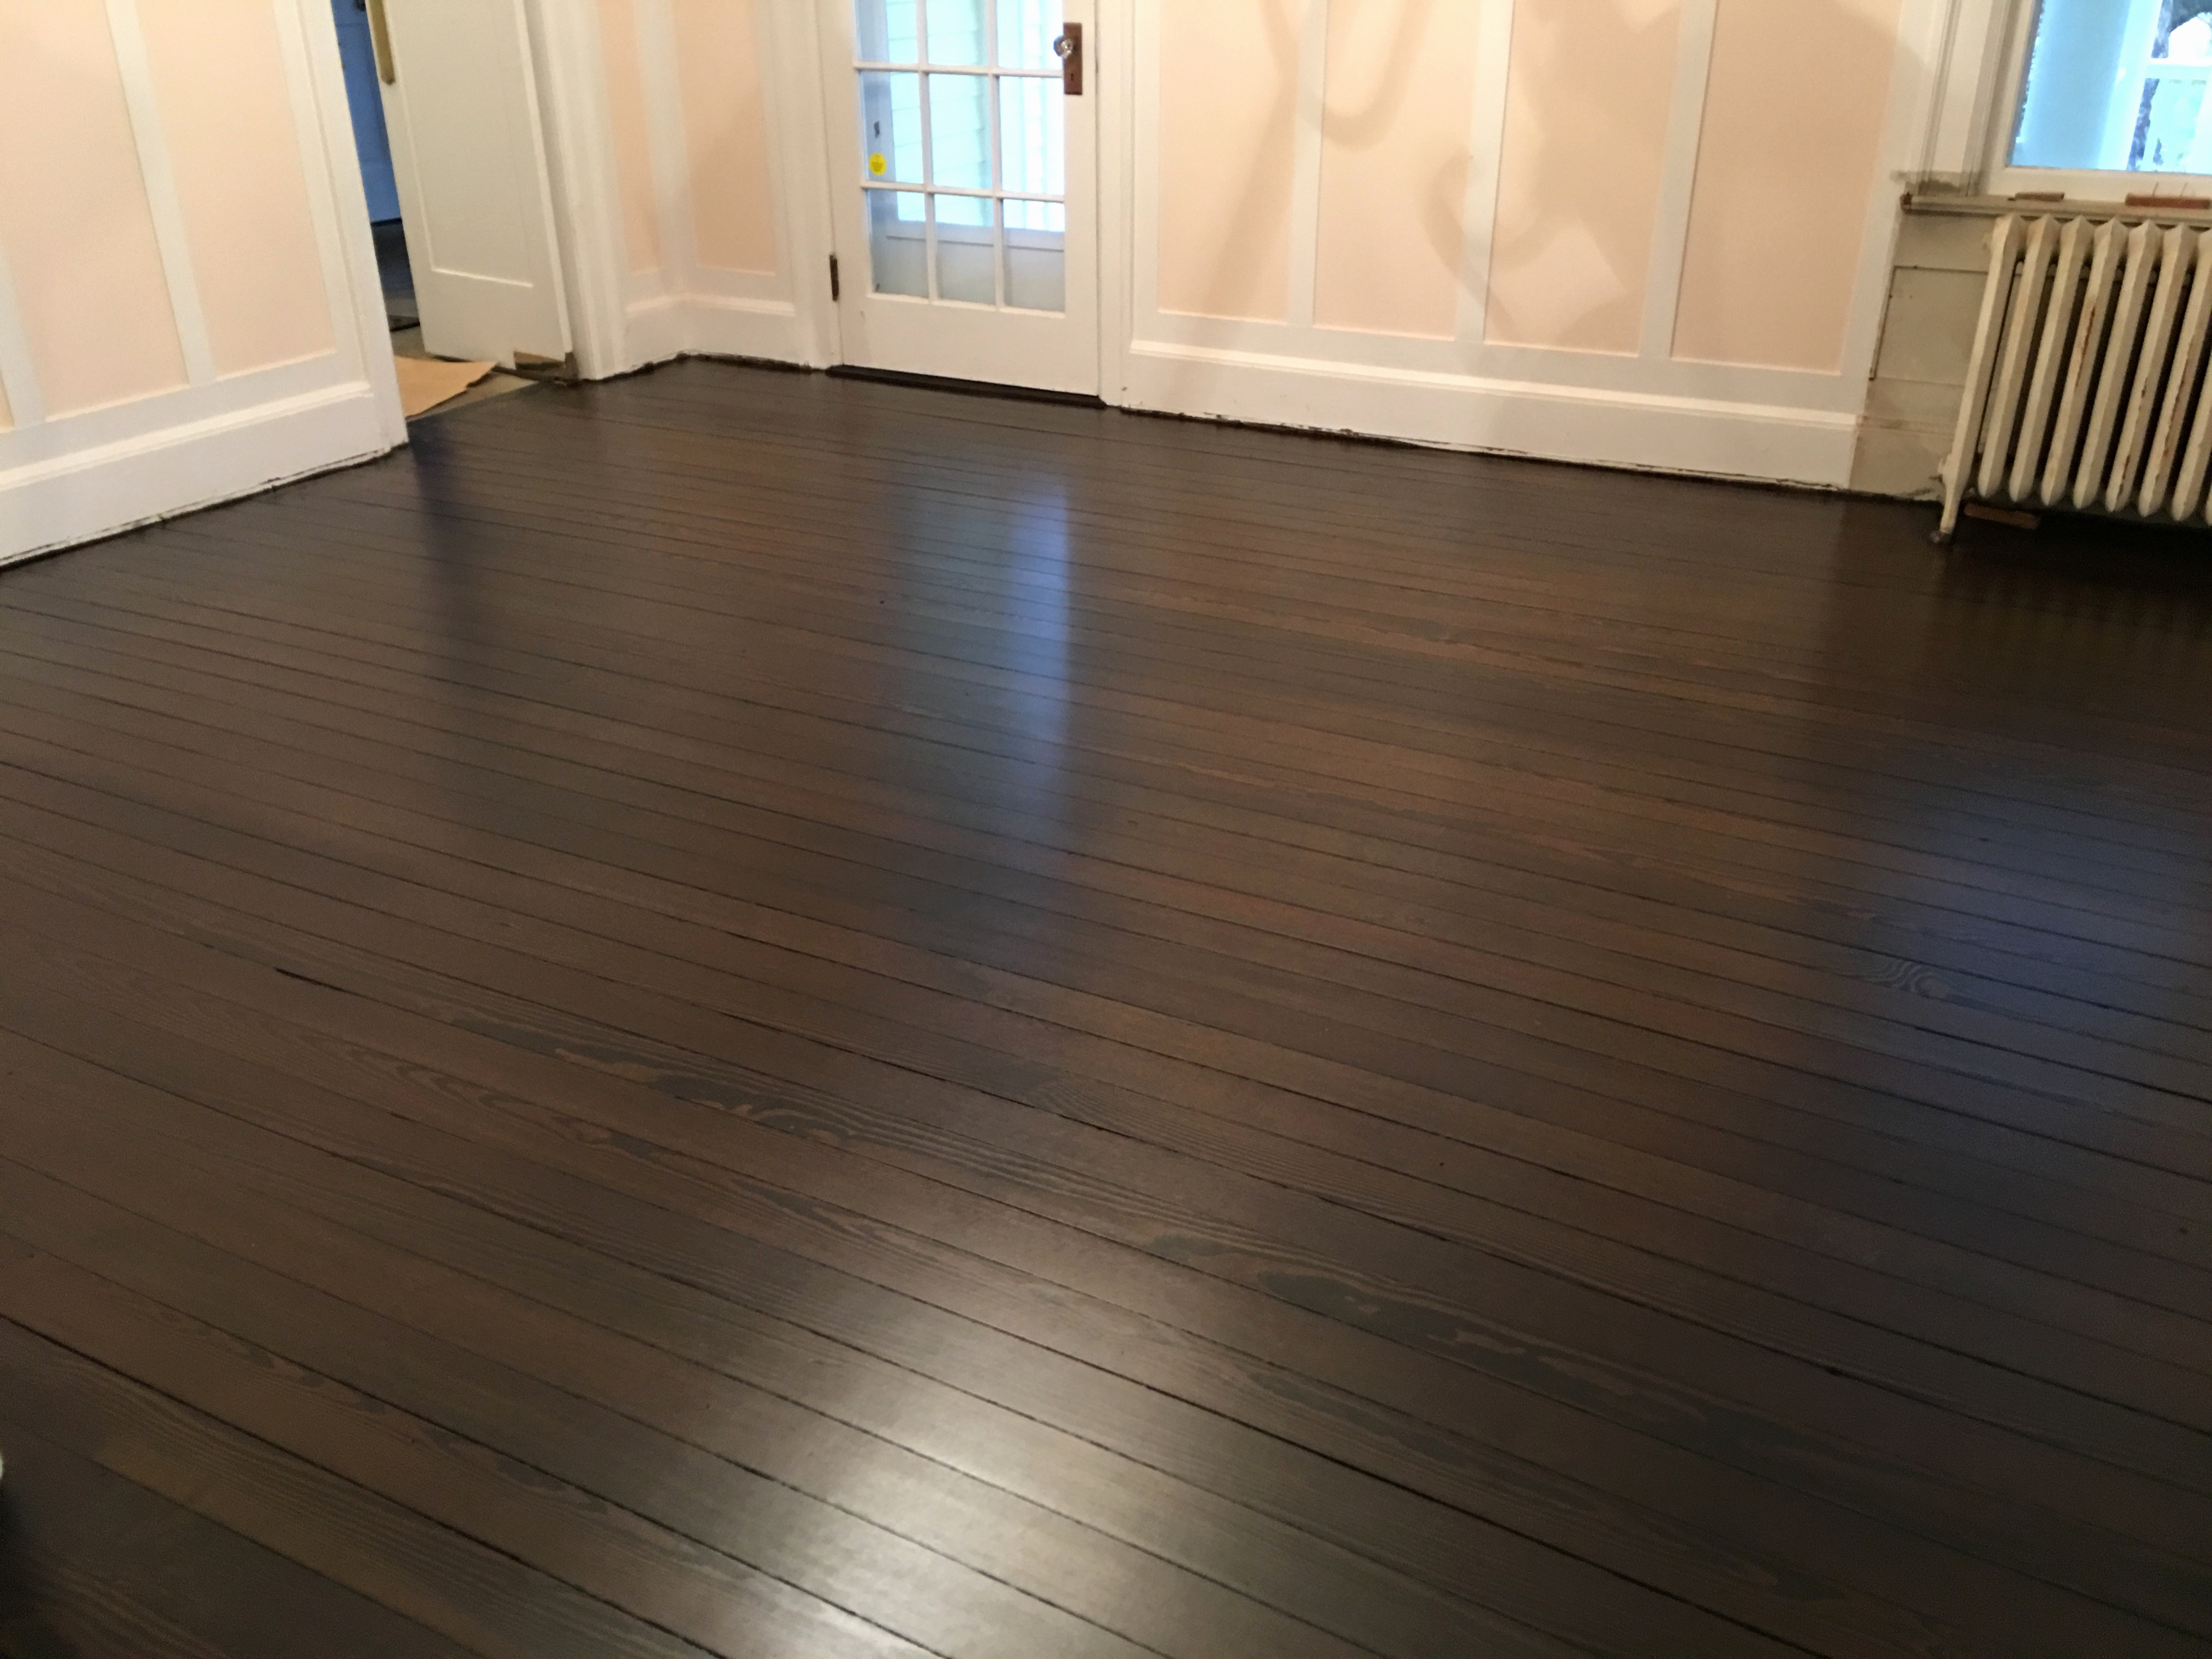 28 Stylish Images Of Hardwood Floor Colors 2024 free download images of hardwood floor colors of hardwoodfloor low voc canada archives wlcu in hardwood floor color trends 2017 elegant wood floor color trends cheap laminate wood flooring hardwood floor 